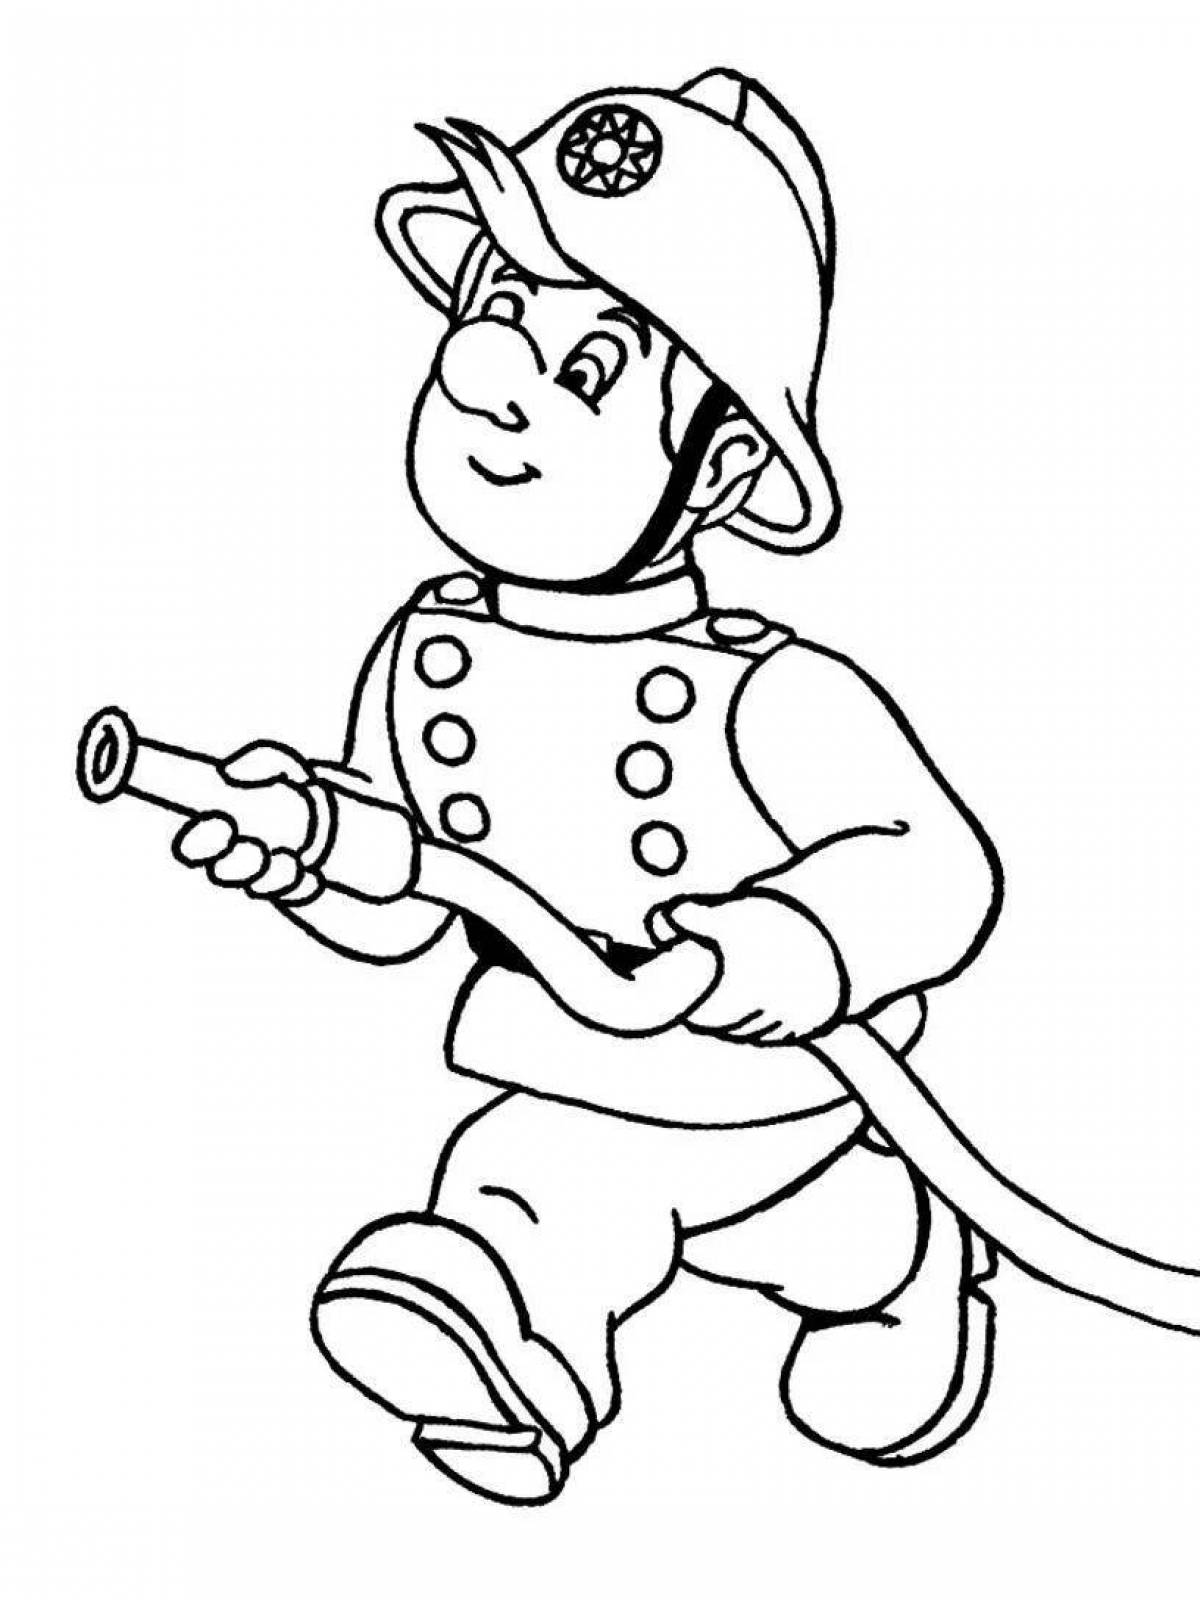 Inspirational firefighter coloring book for kids